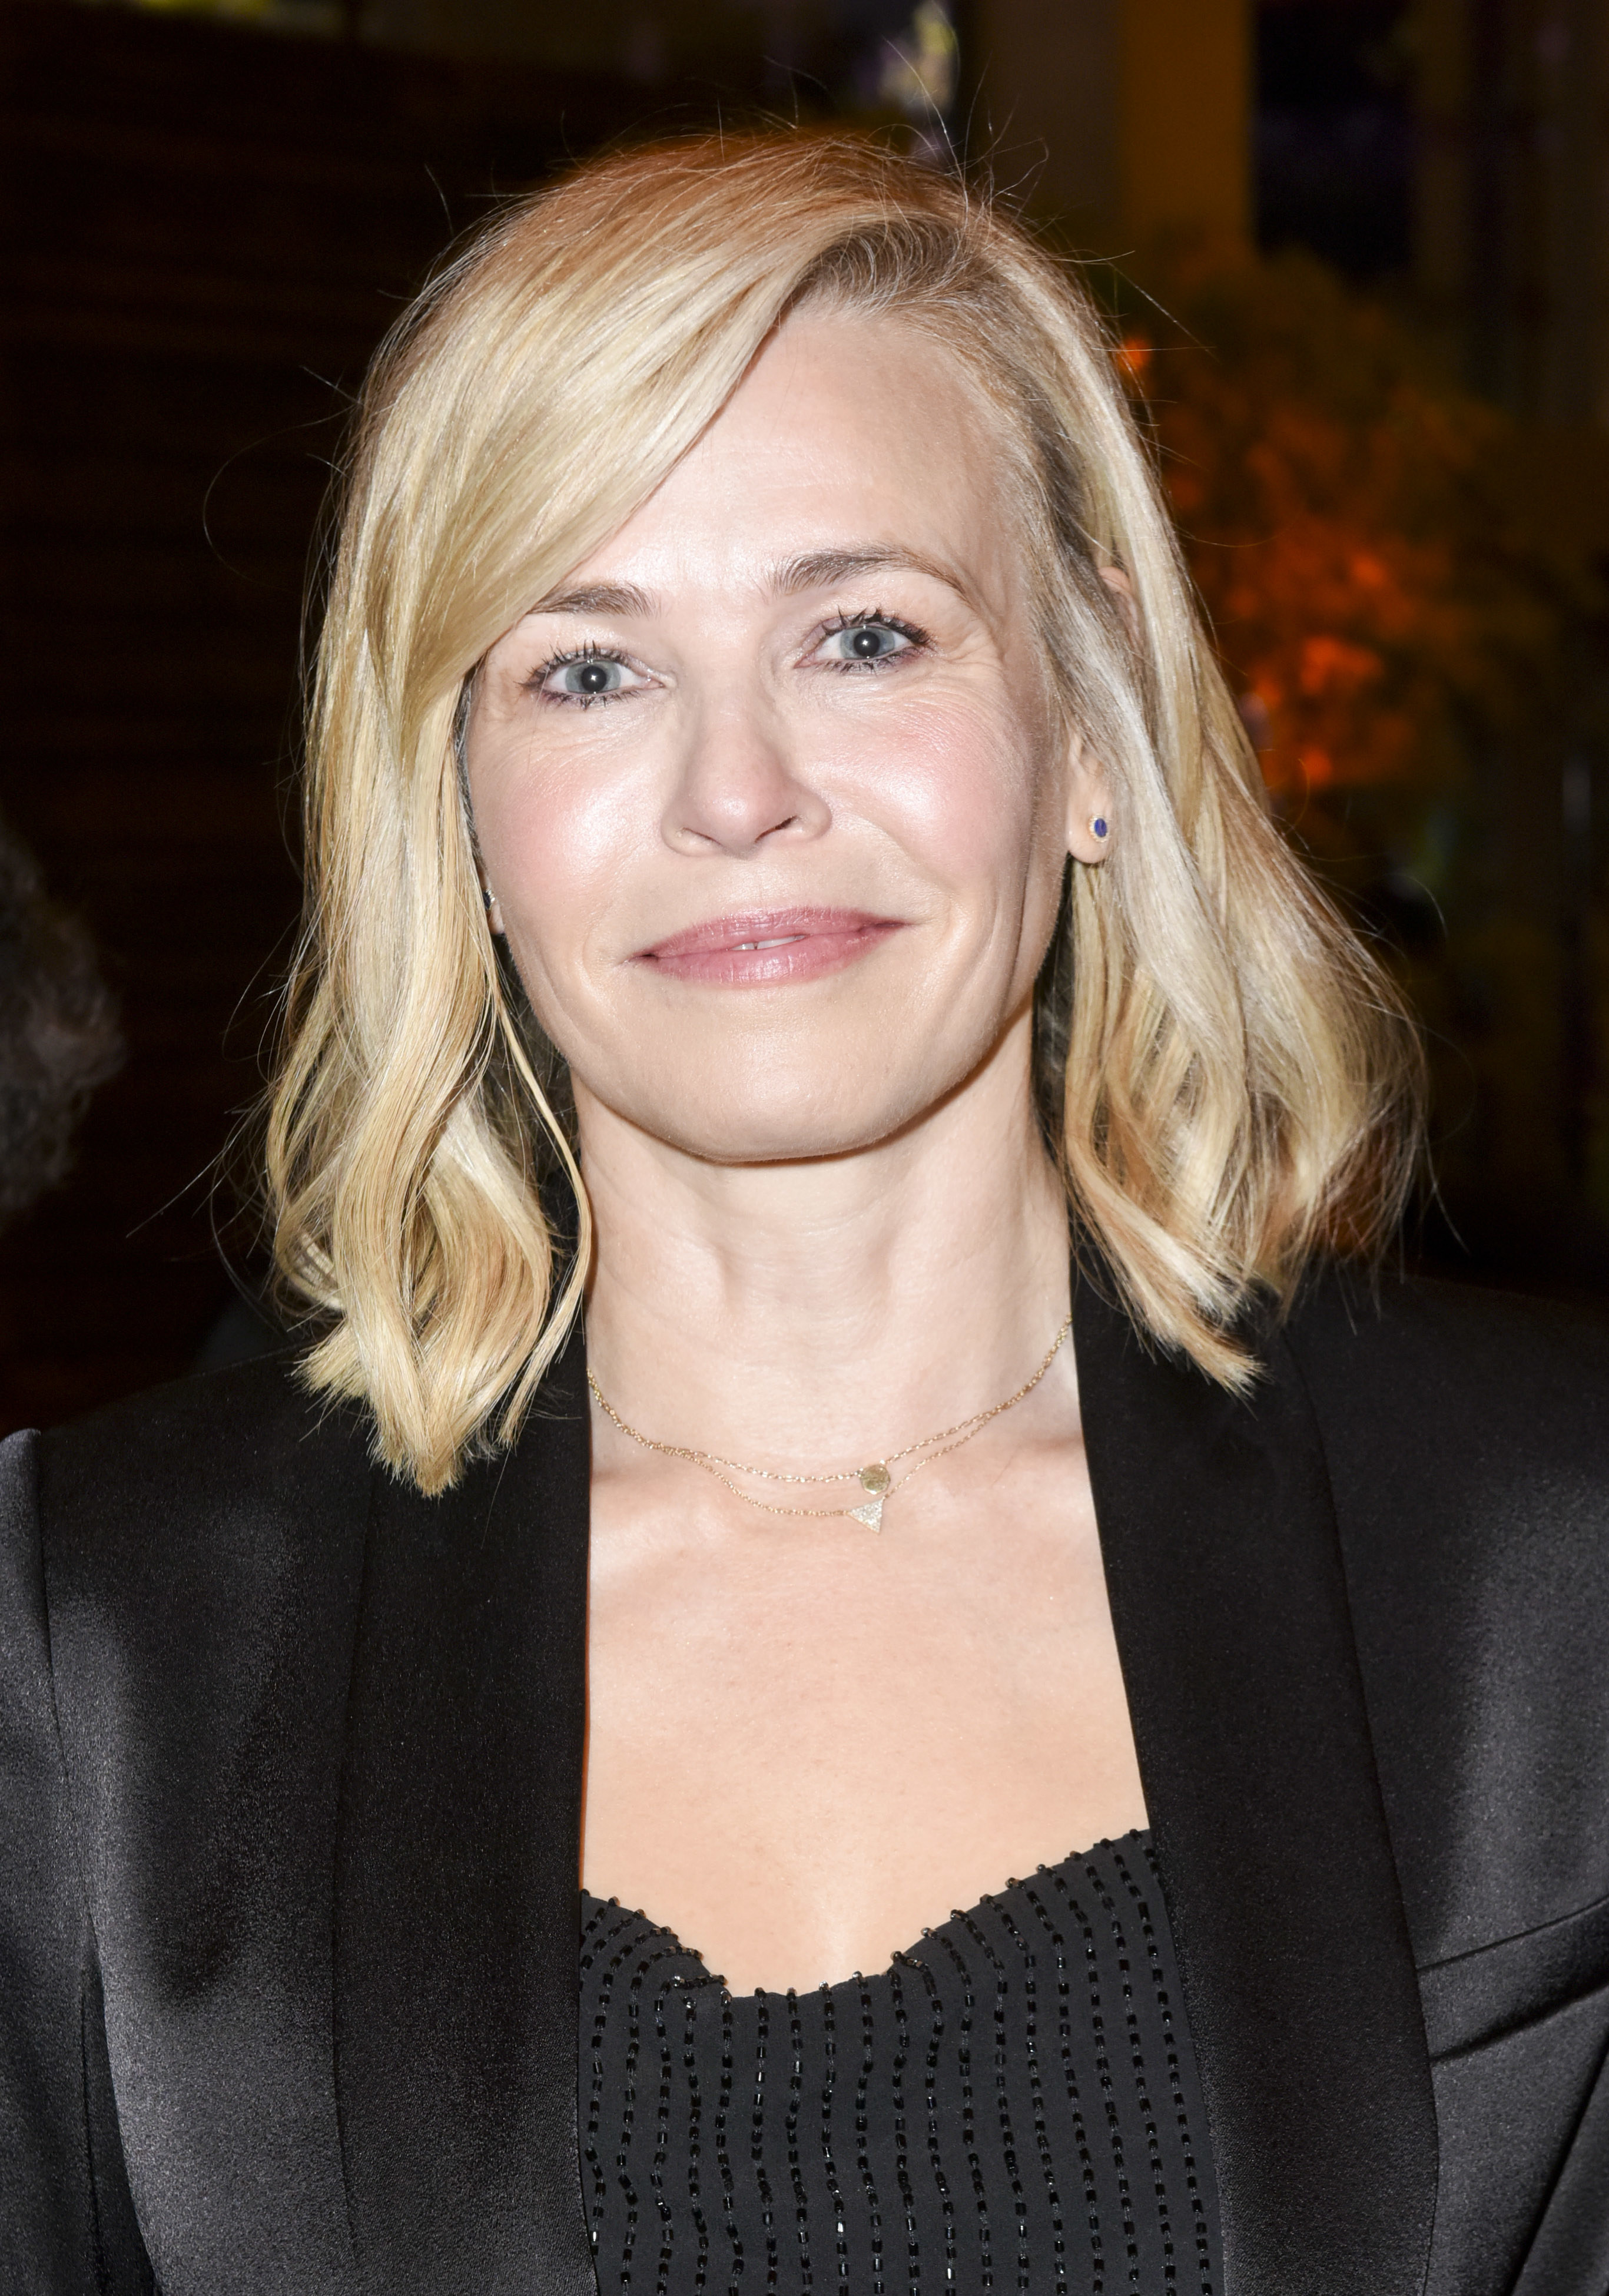 Chelsea Handler, wearing black, poses at an event